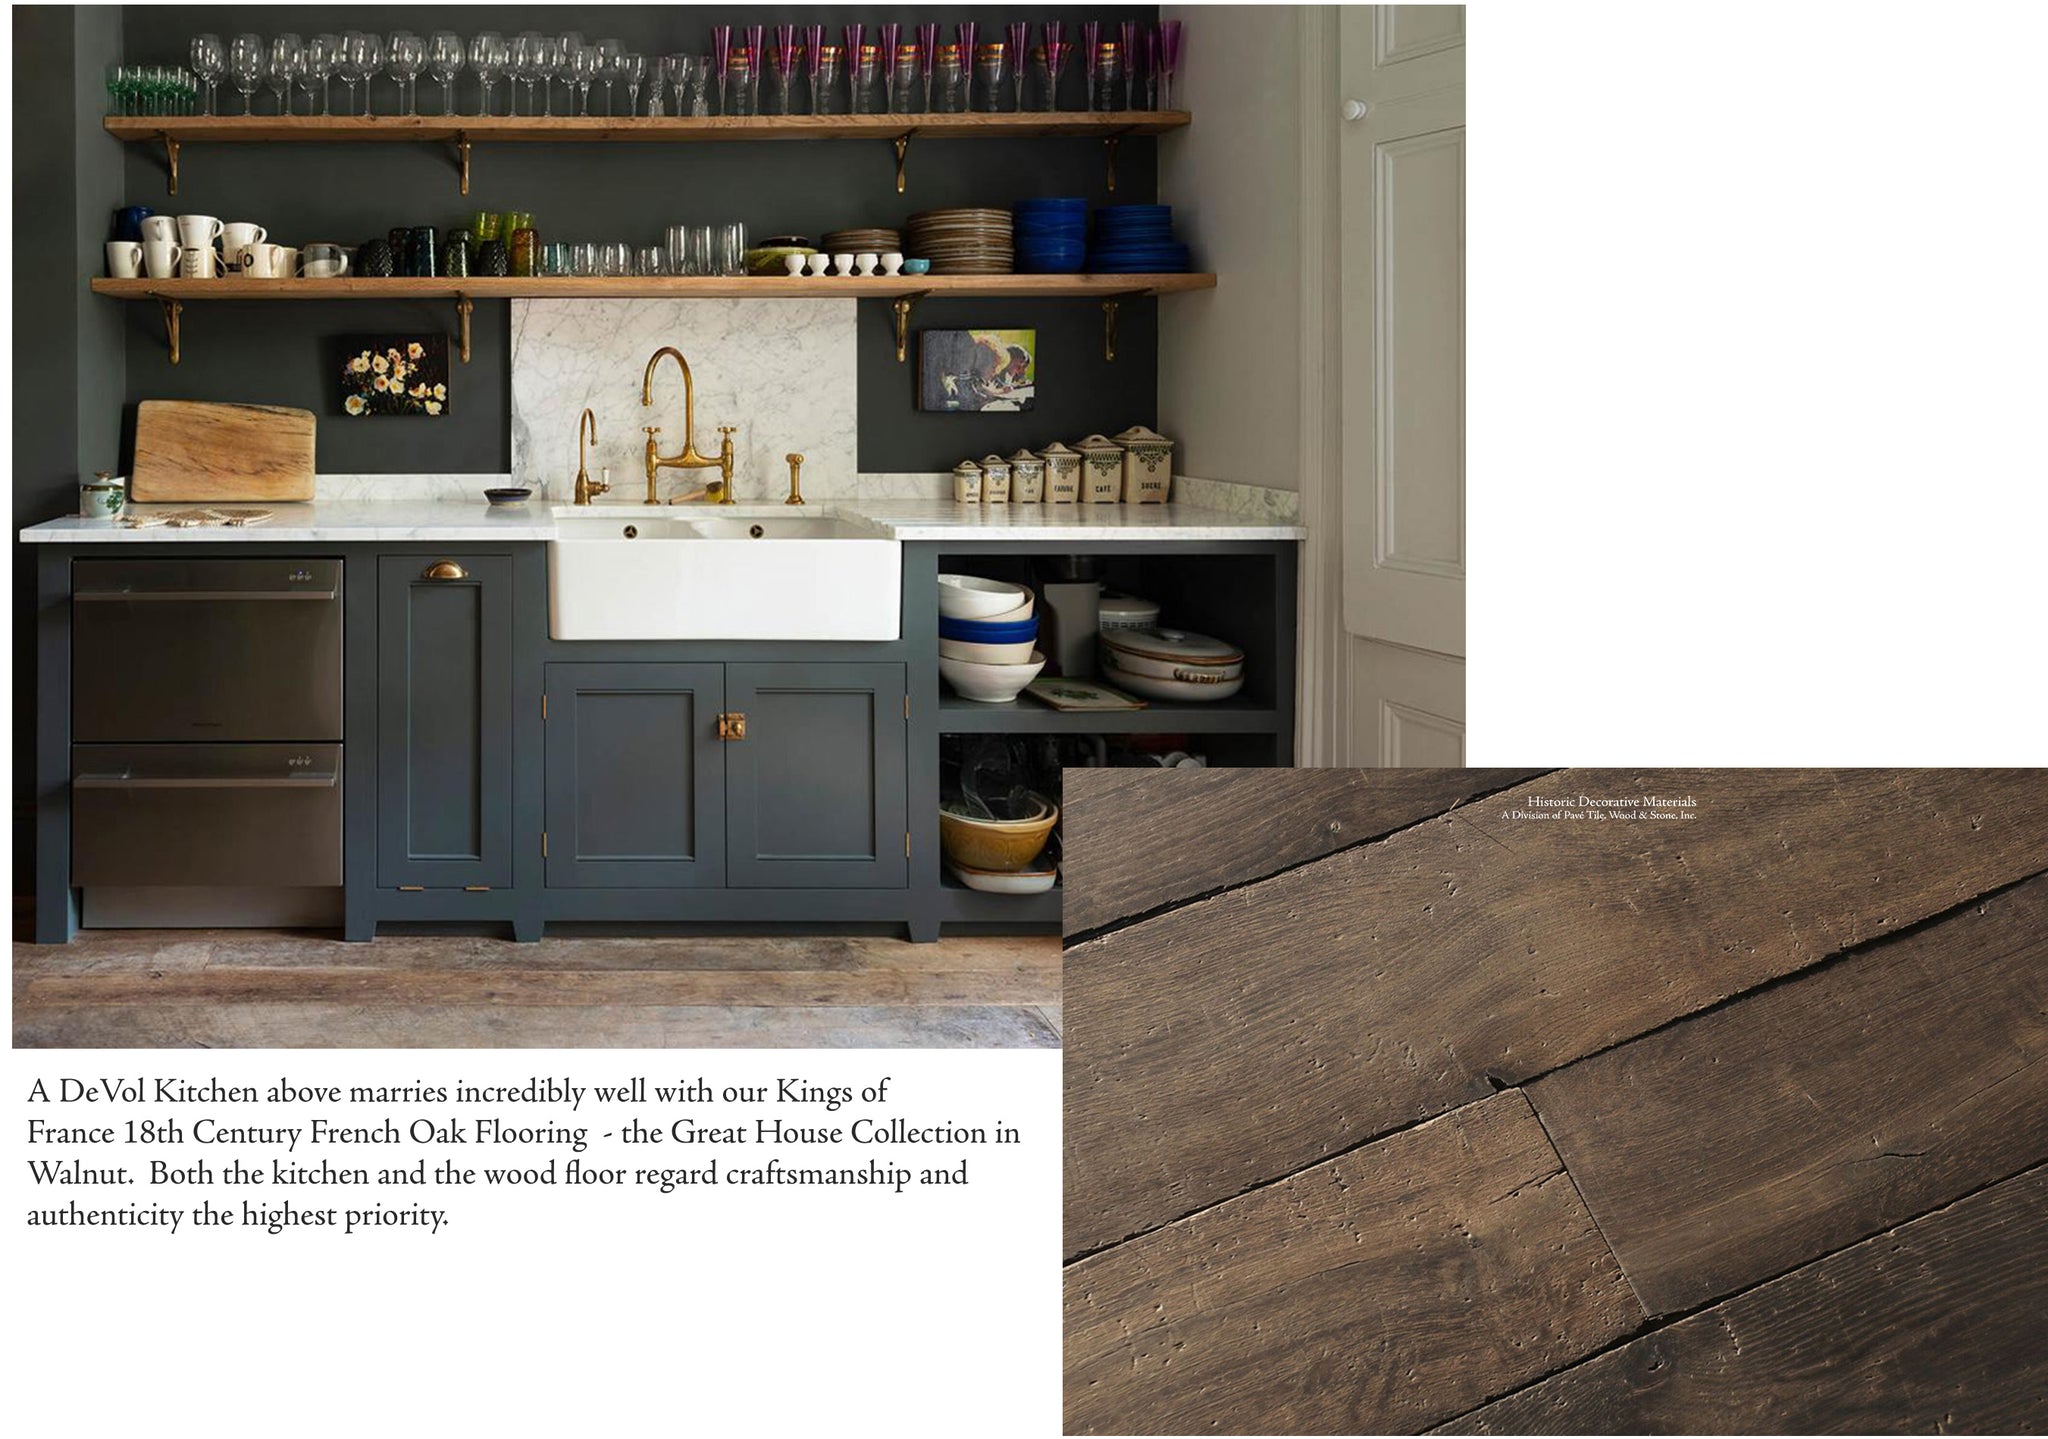 The Classic English Kitchen and the Shaker Style Kitchens like those of DeVol Kitchens and Plain English Kitchens marries so well with the Kings of France 18th Century French Oak Flooring